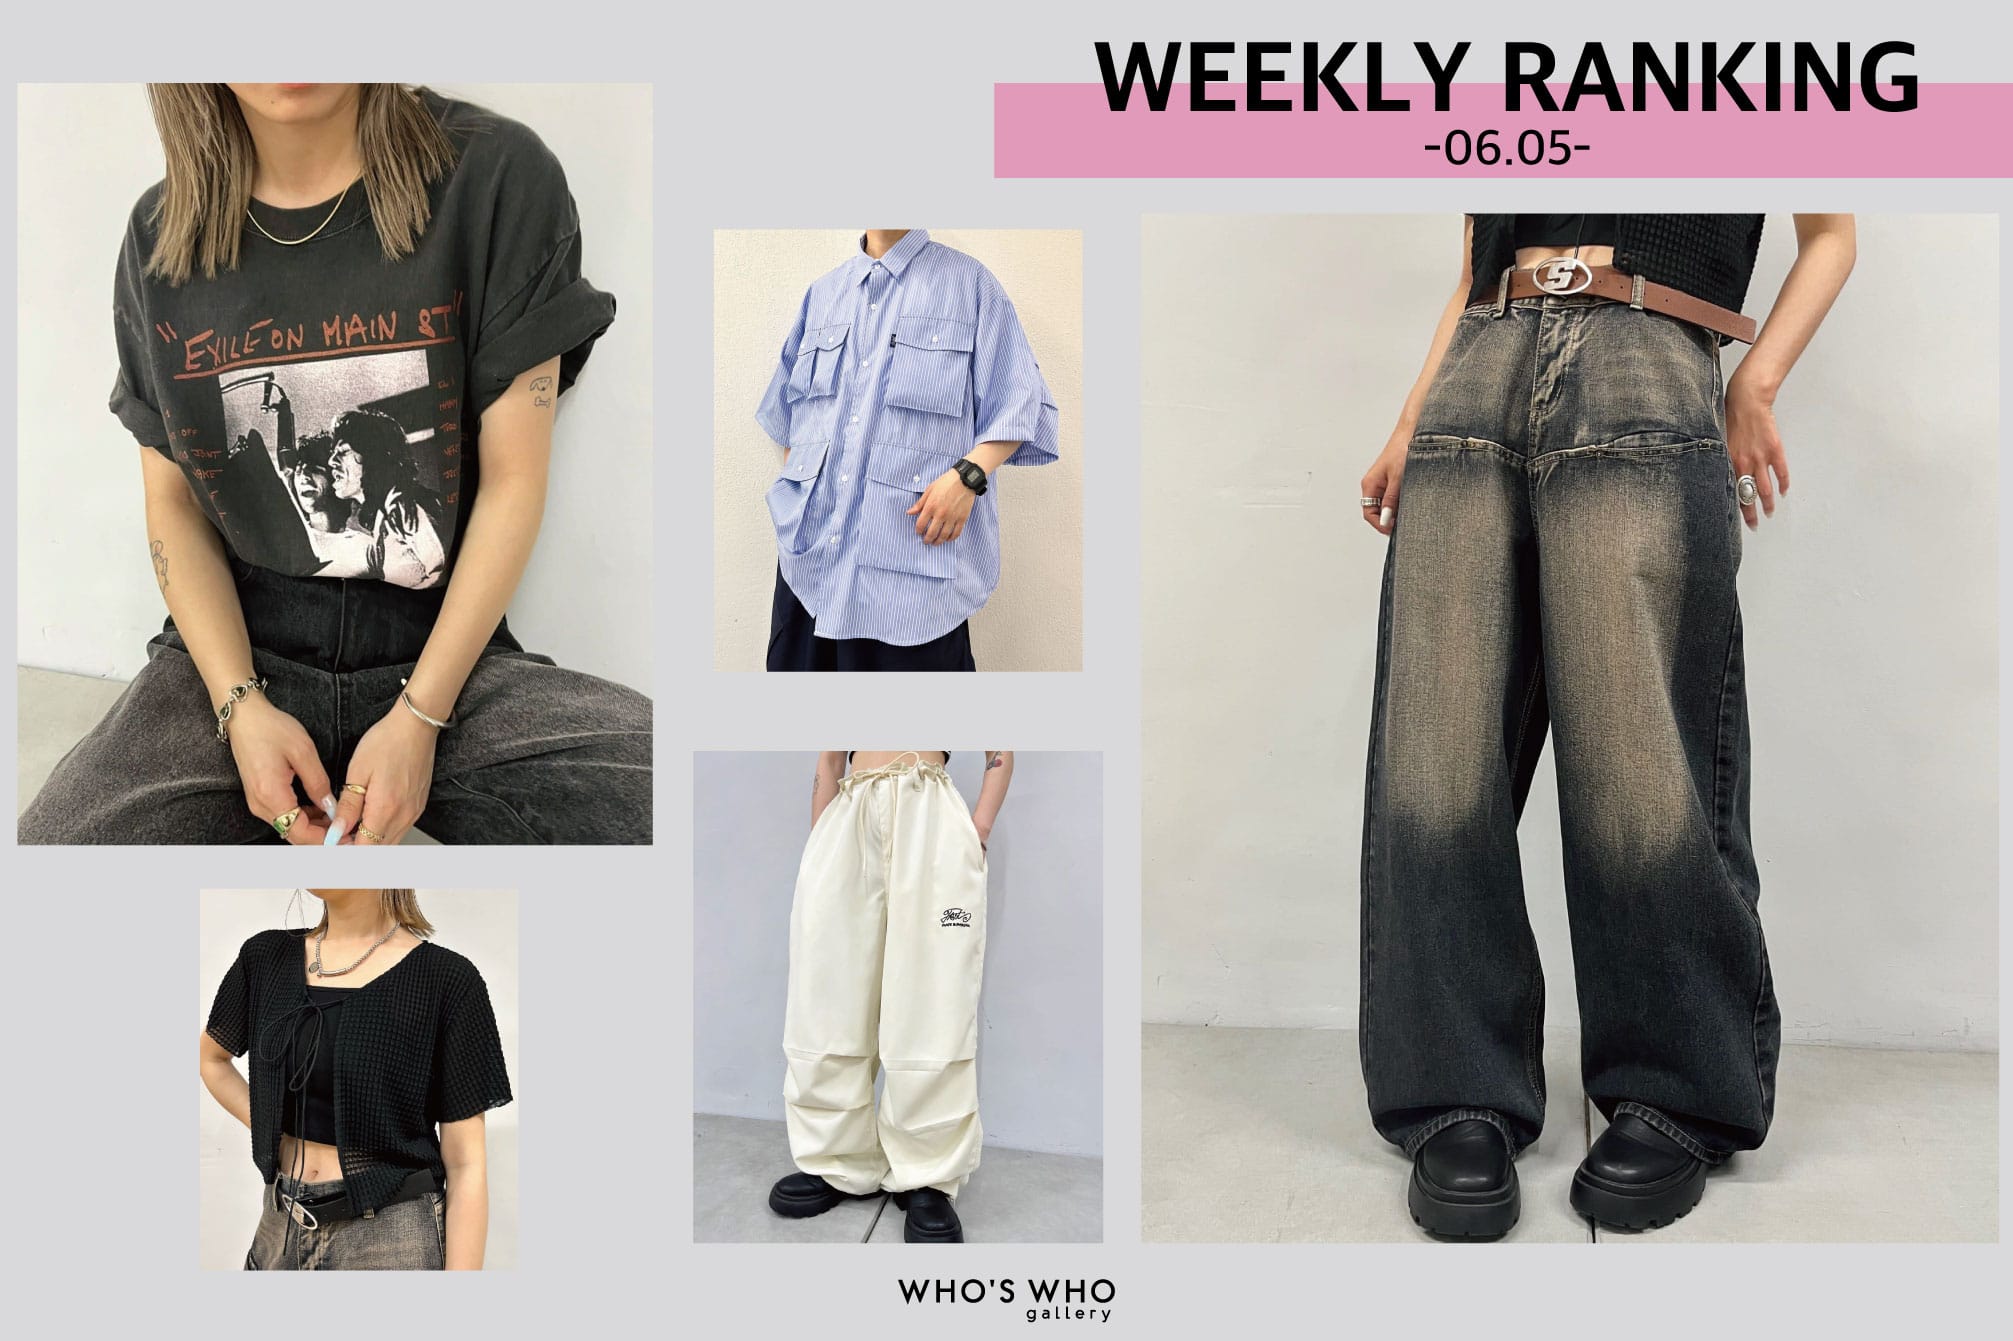 WHO’S WHO gallery 【WEEKLY RANKING -06.05-】